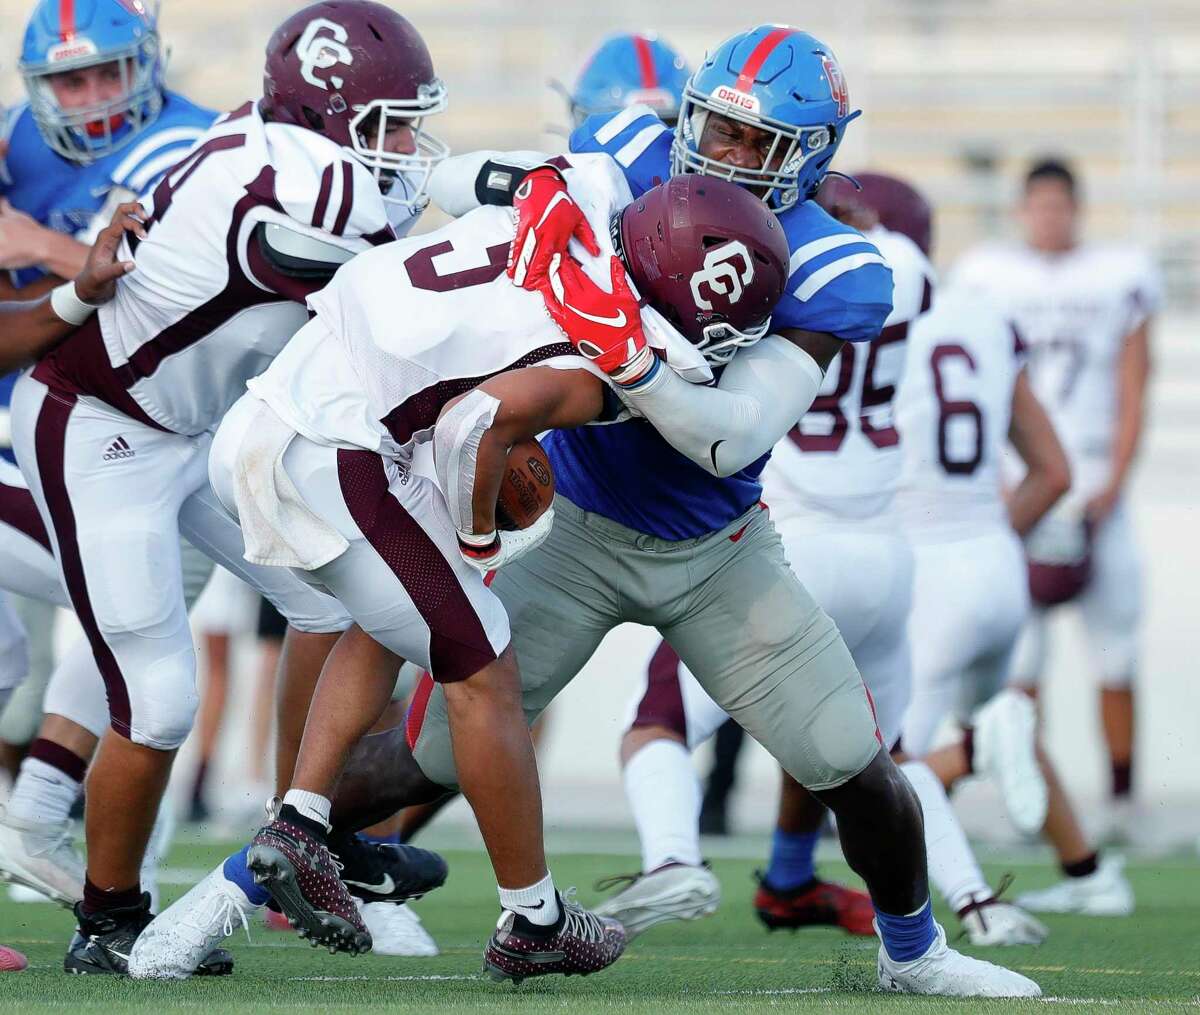 Oak Ridge outside linebacker KC Ossai (8) tackles Clear Creek running back Jeremiah Crum (5) for a loss on third down during the first quarter of a non-district high school football game at Woodforest Bank Stadium, Saturday, Sept. 26, 2020, in Shenandoah.